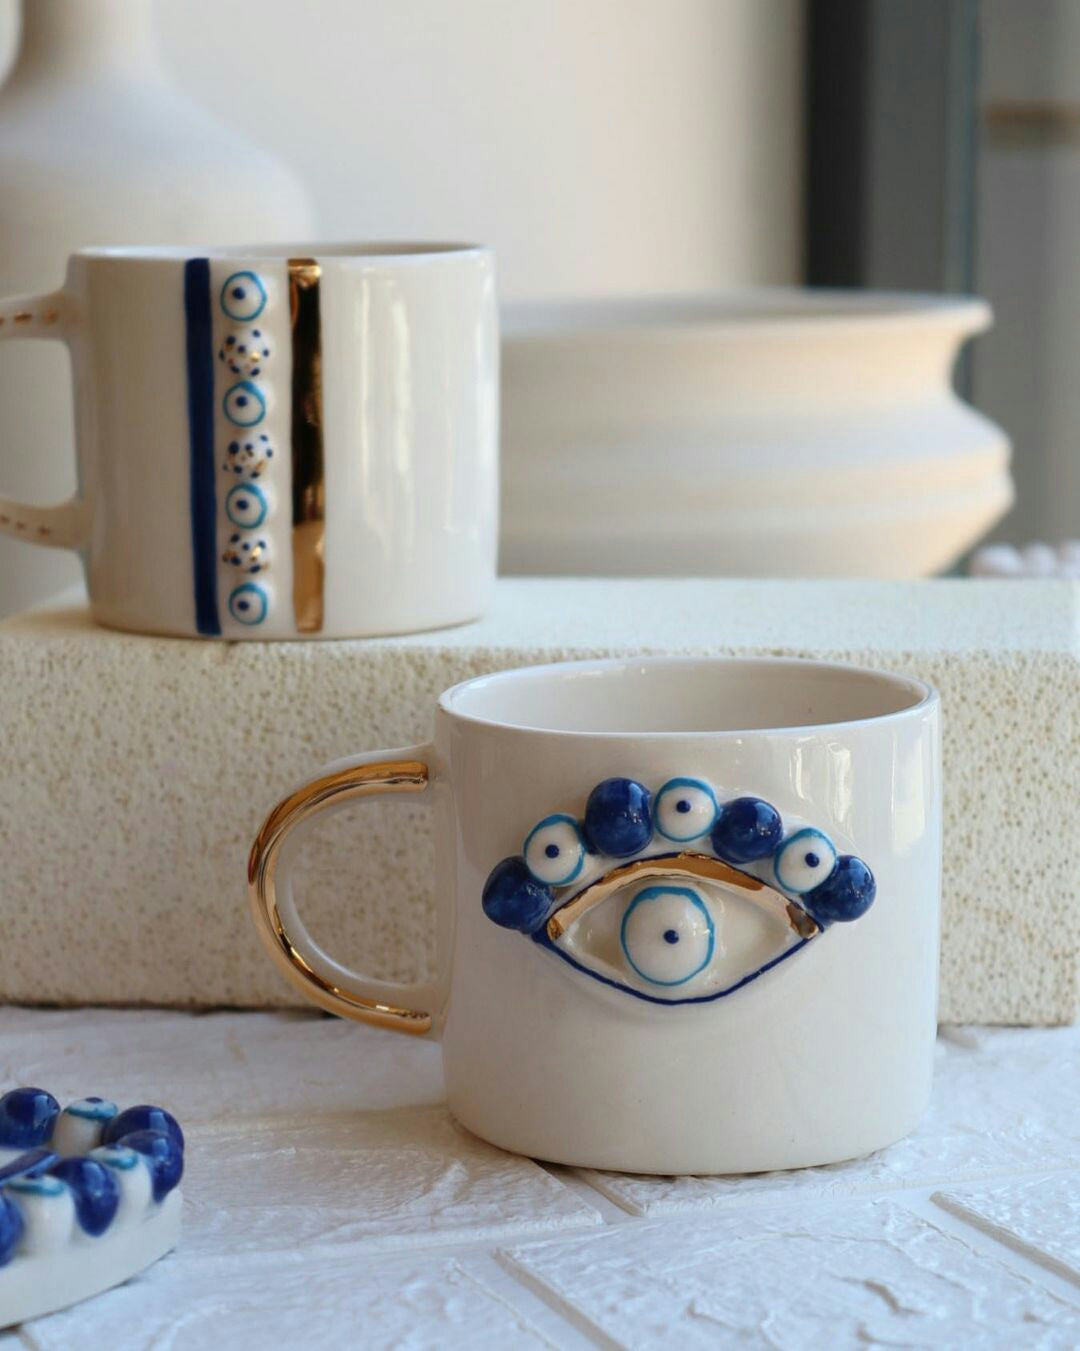 Struggling to Find Unique Corporate Gifts? Discover Unique Handmade Coffee Mugs and Espresso Cups That Impress!